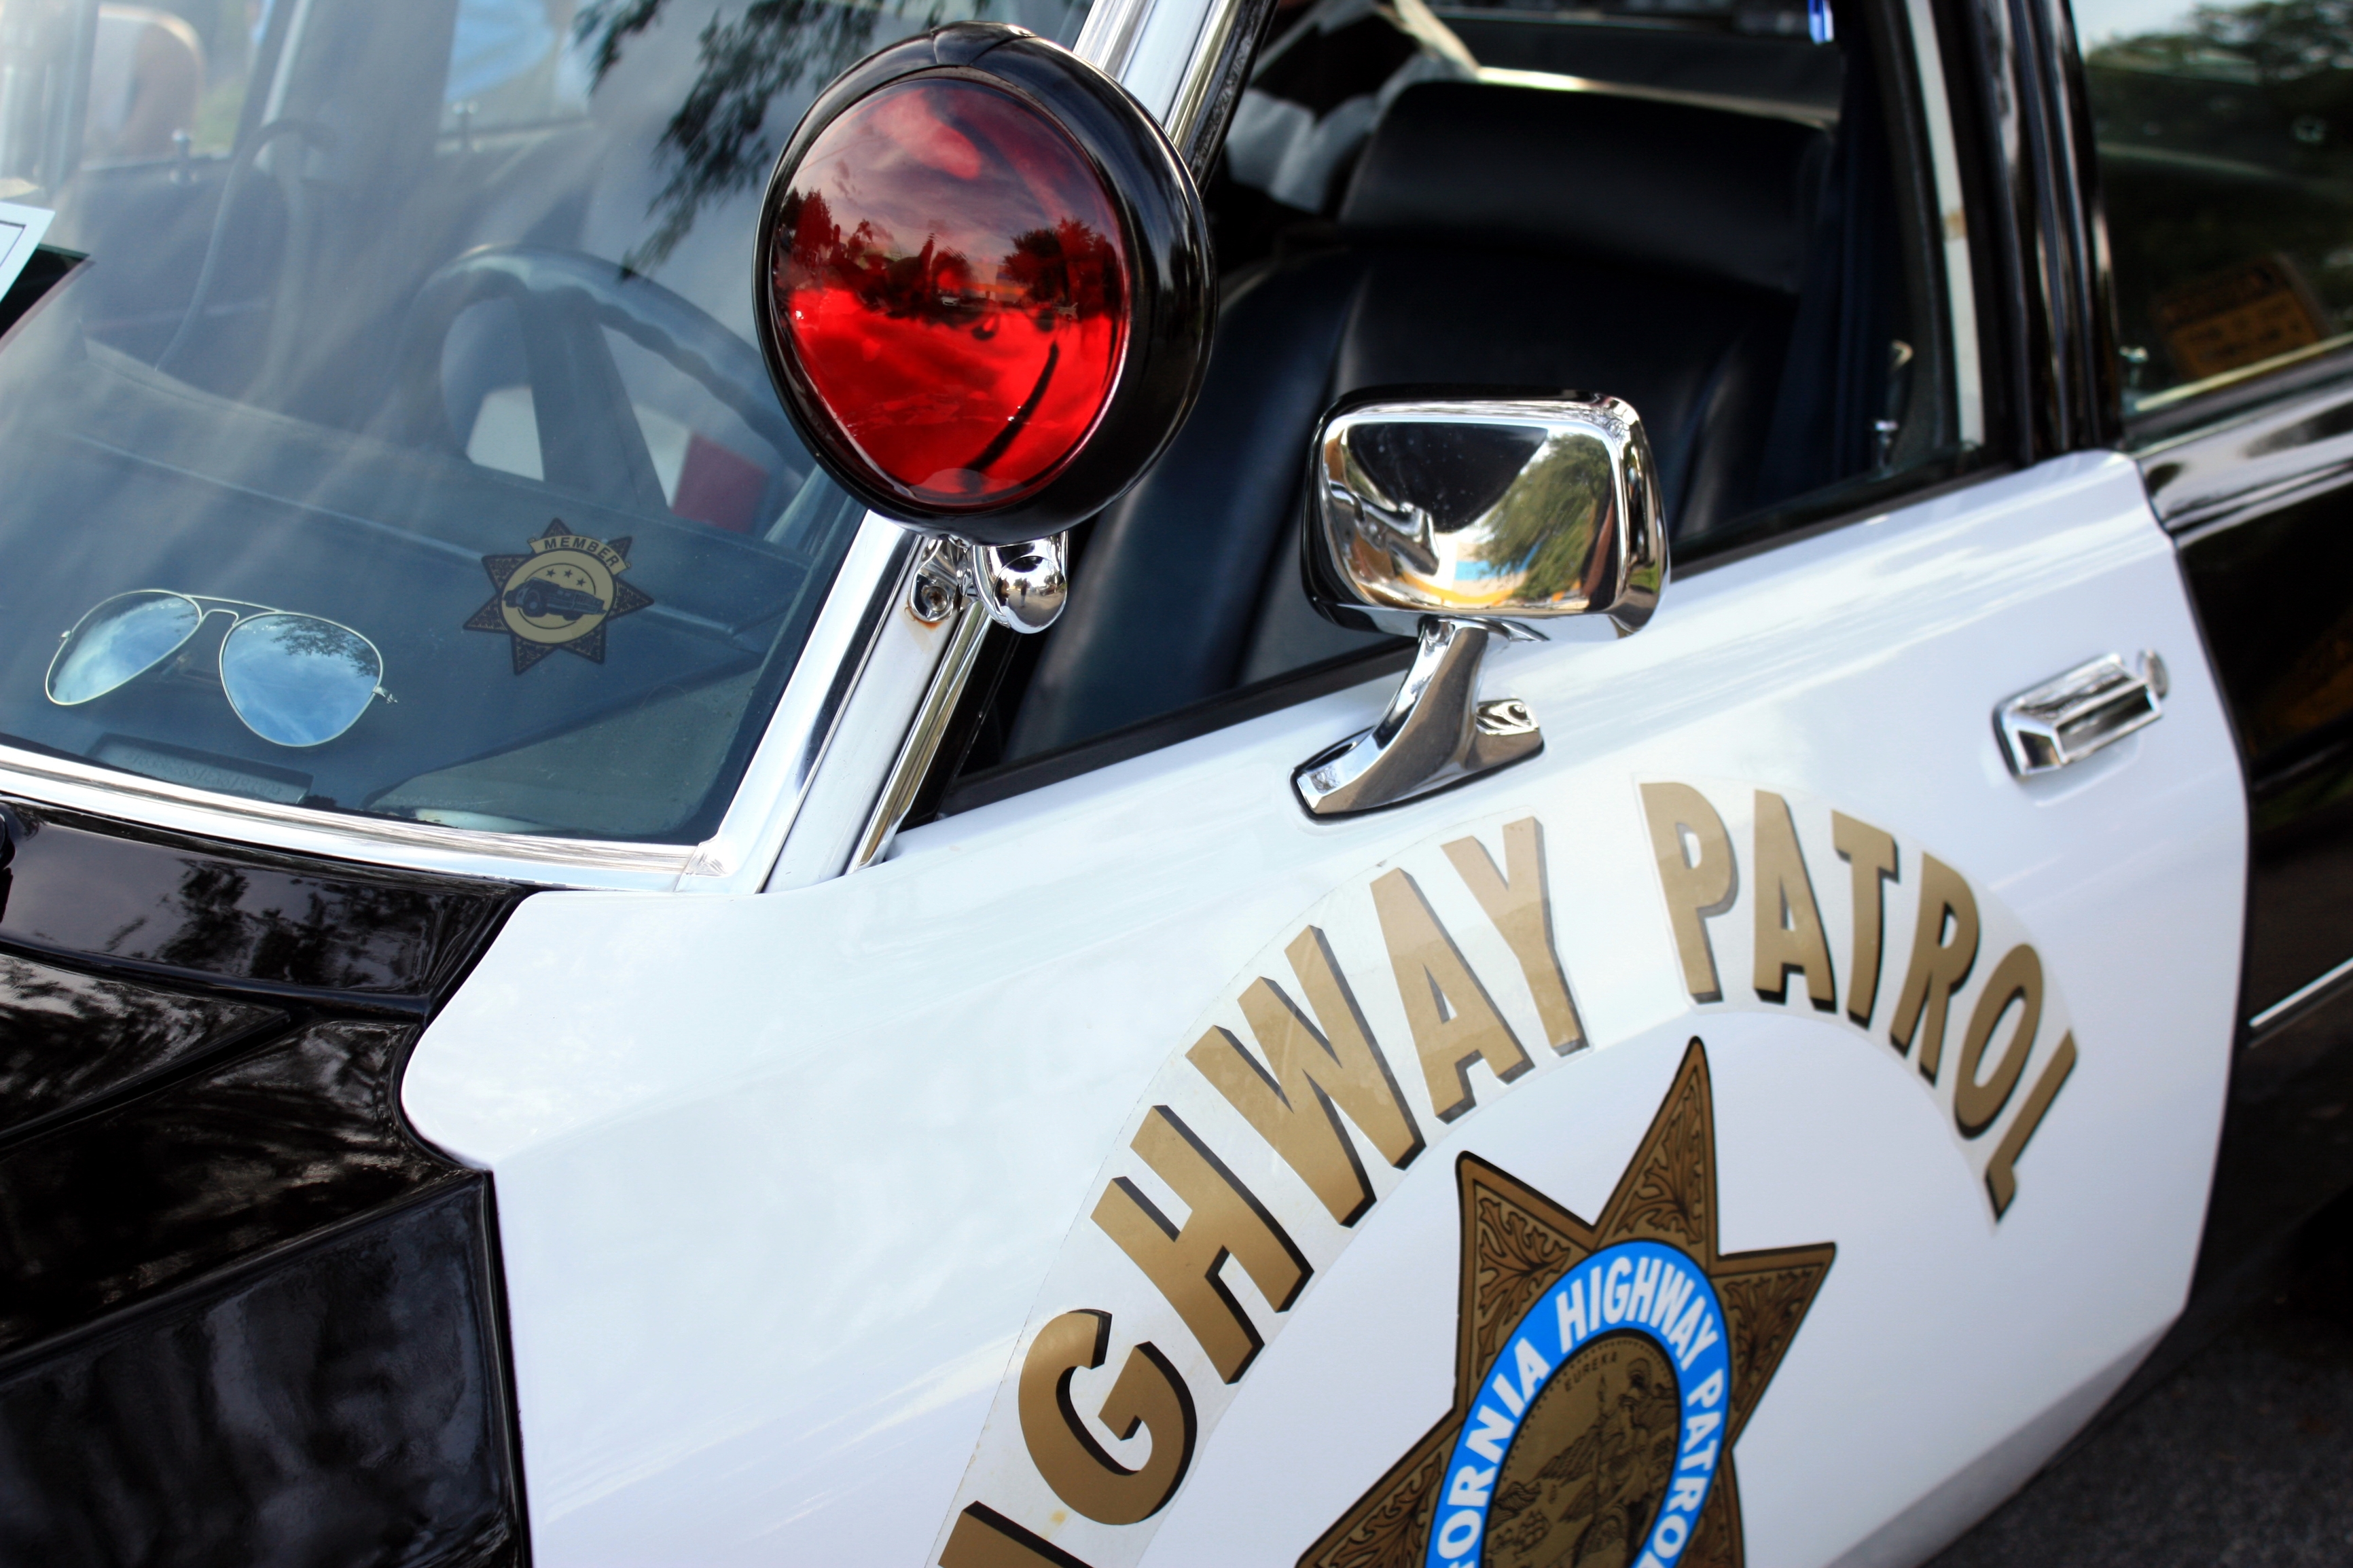 California Highway Patrol Officers Temporarily Forgo Pay Hikes to Help Fund Pension Liabilities